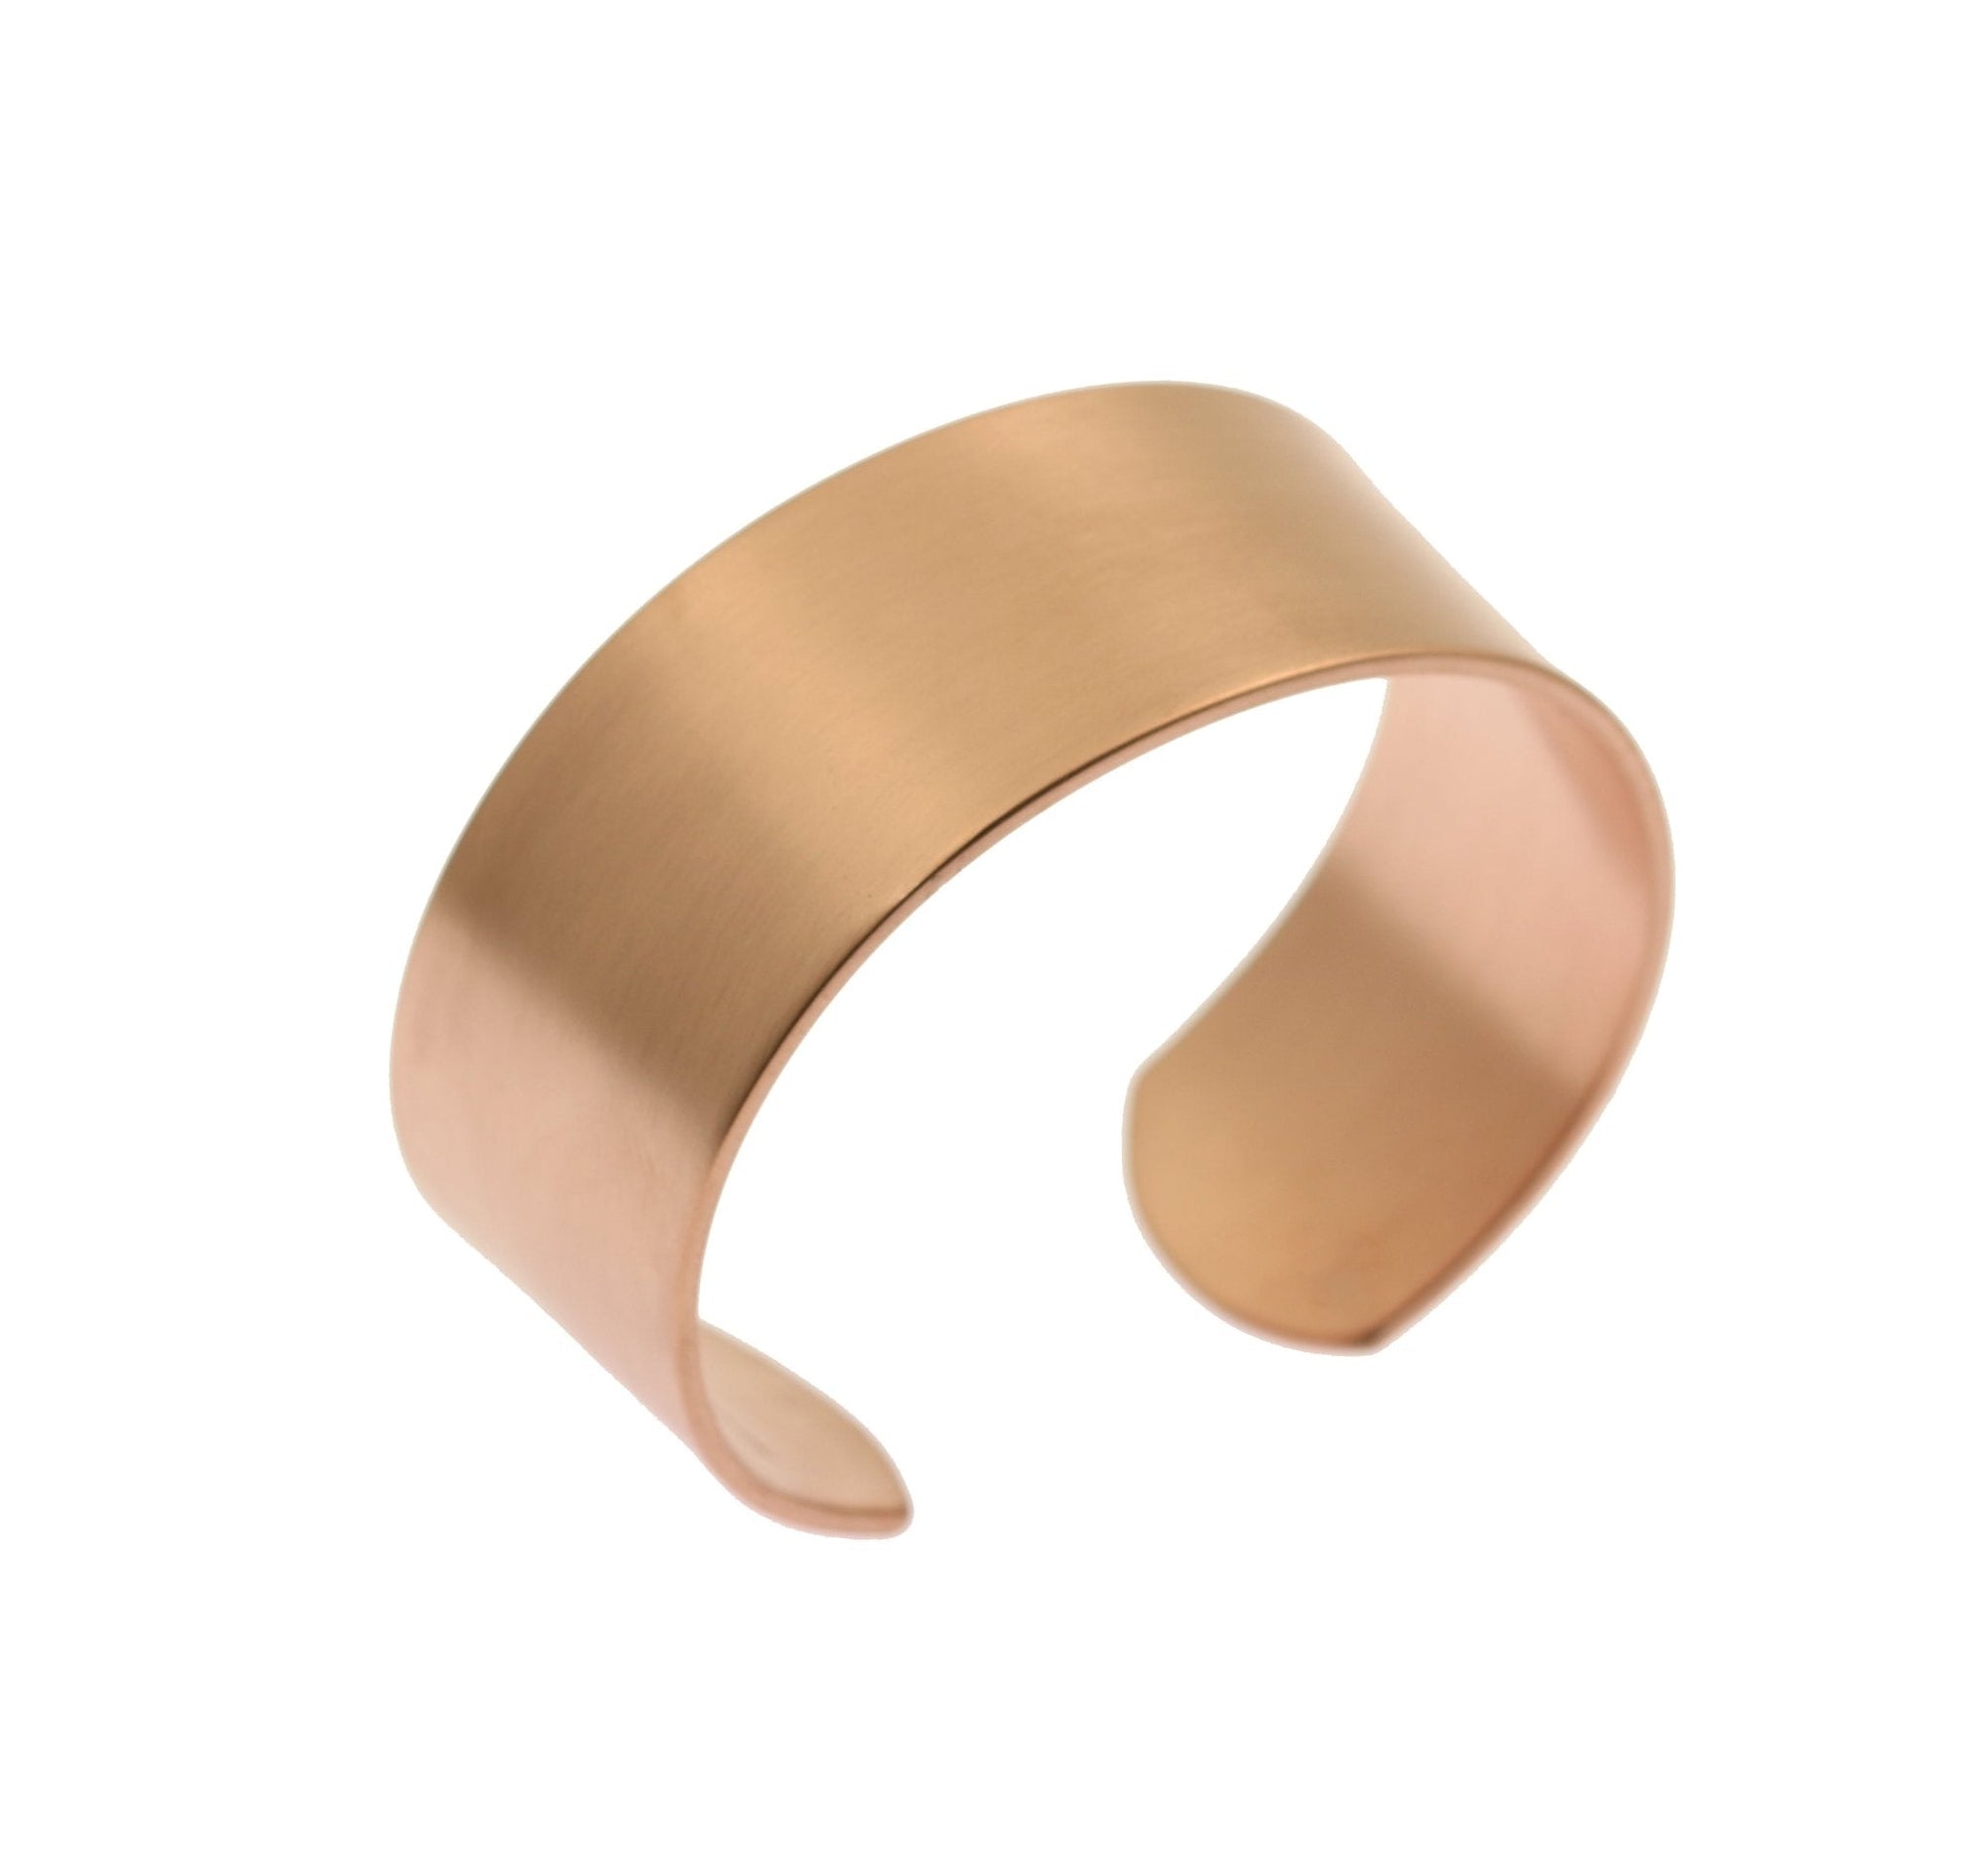 1 Inch Wide Brushed Copper Cuff Bracelet Left Side View